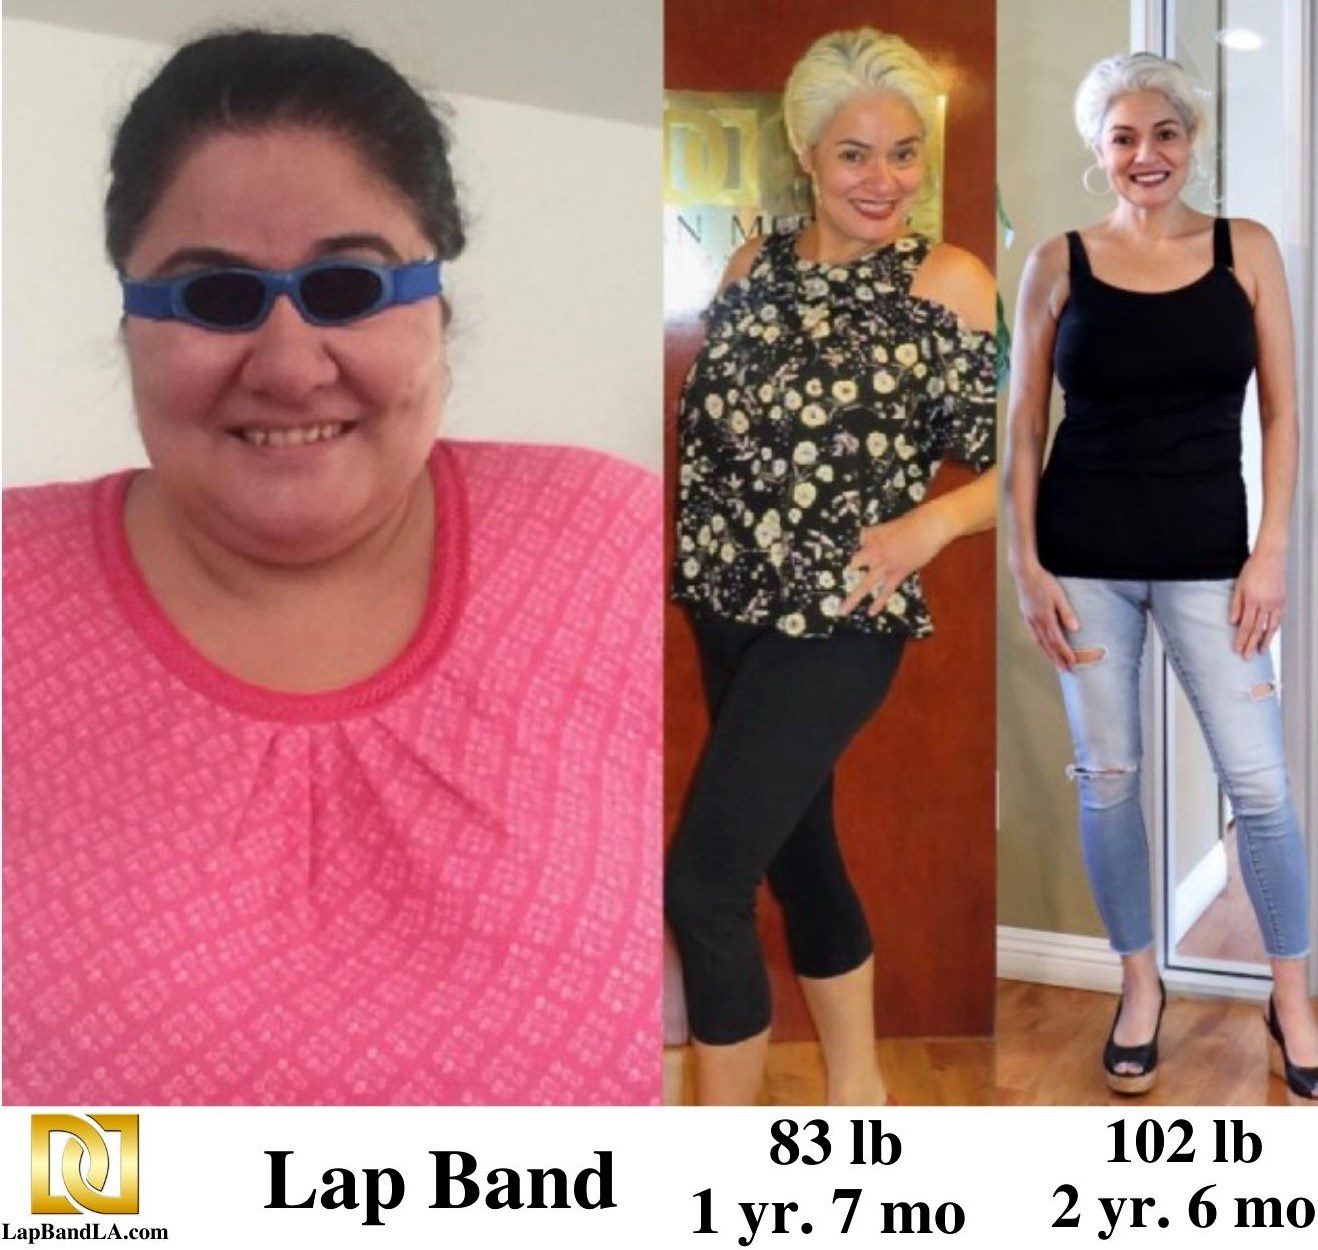 Dr Davtyan's female patient before and after lap band weight loss surgery